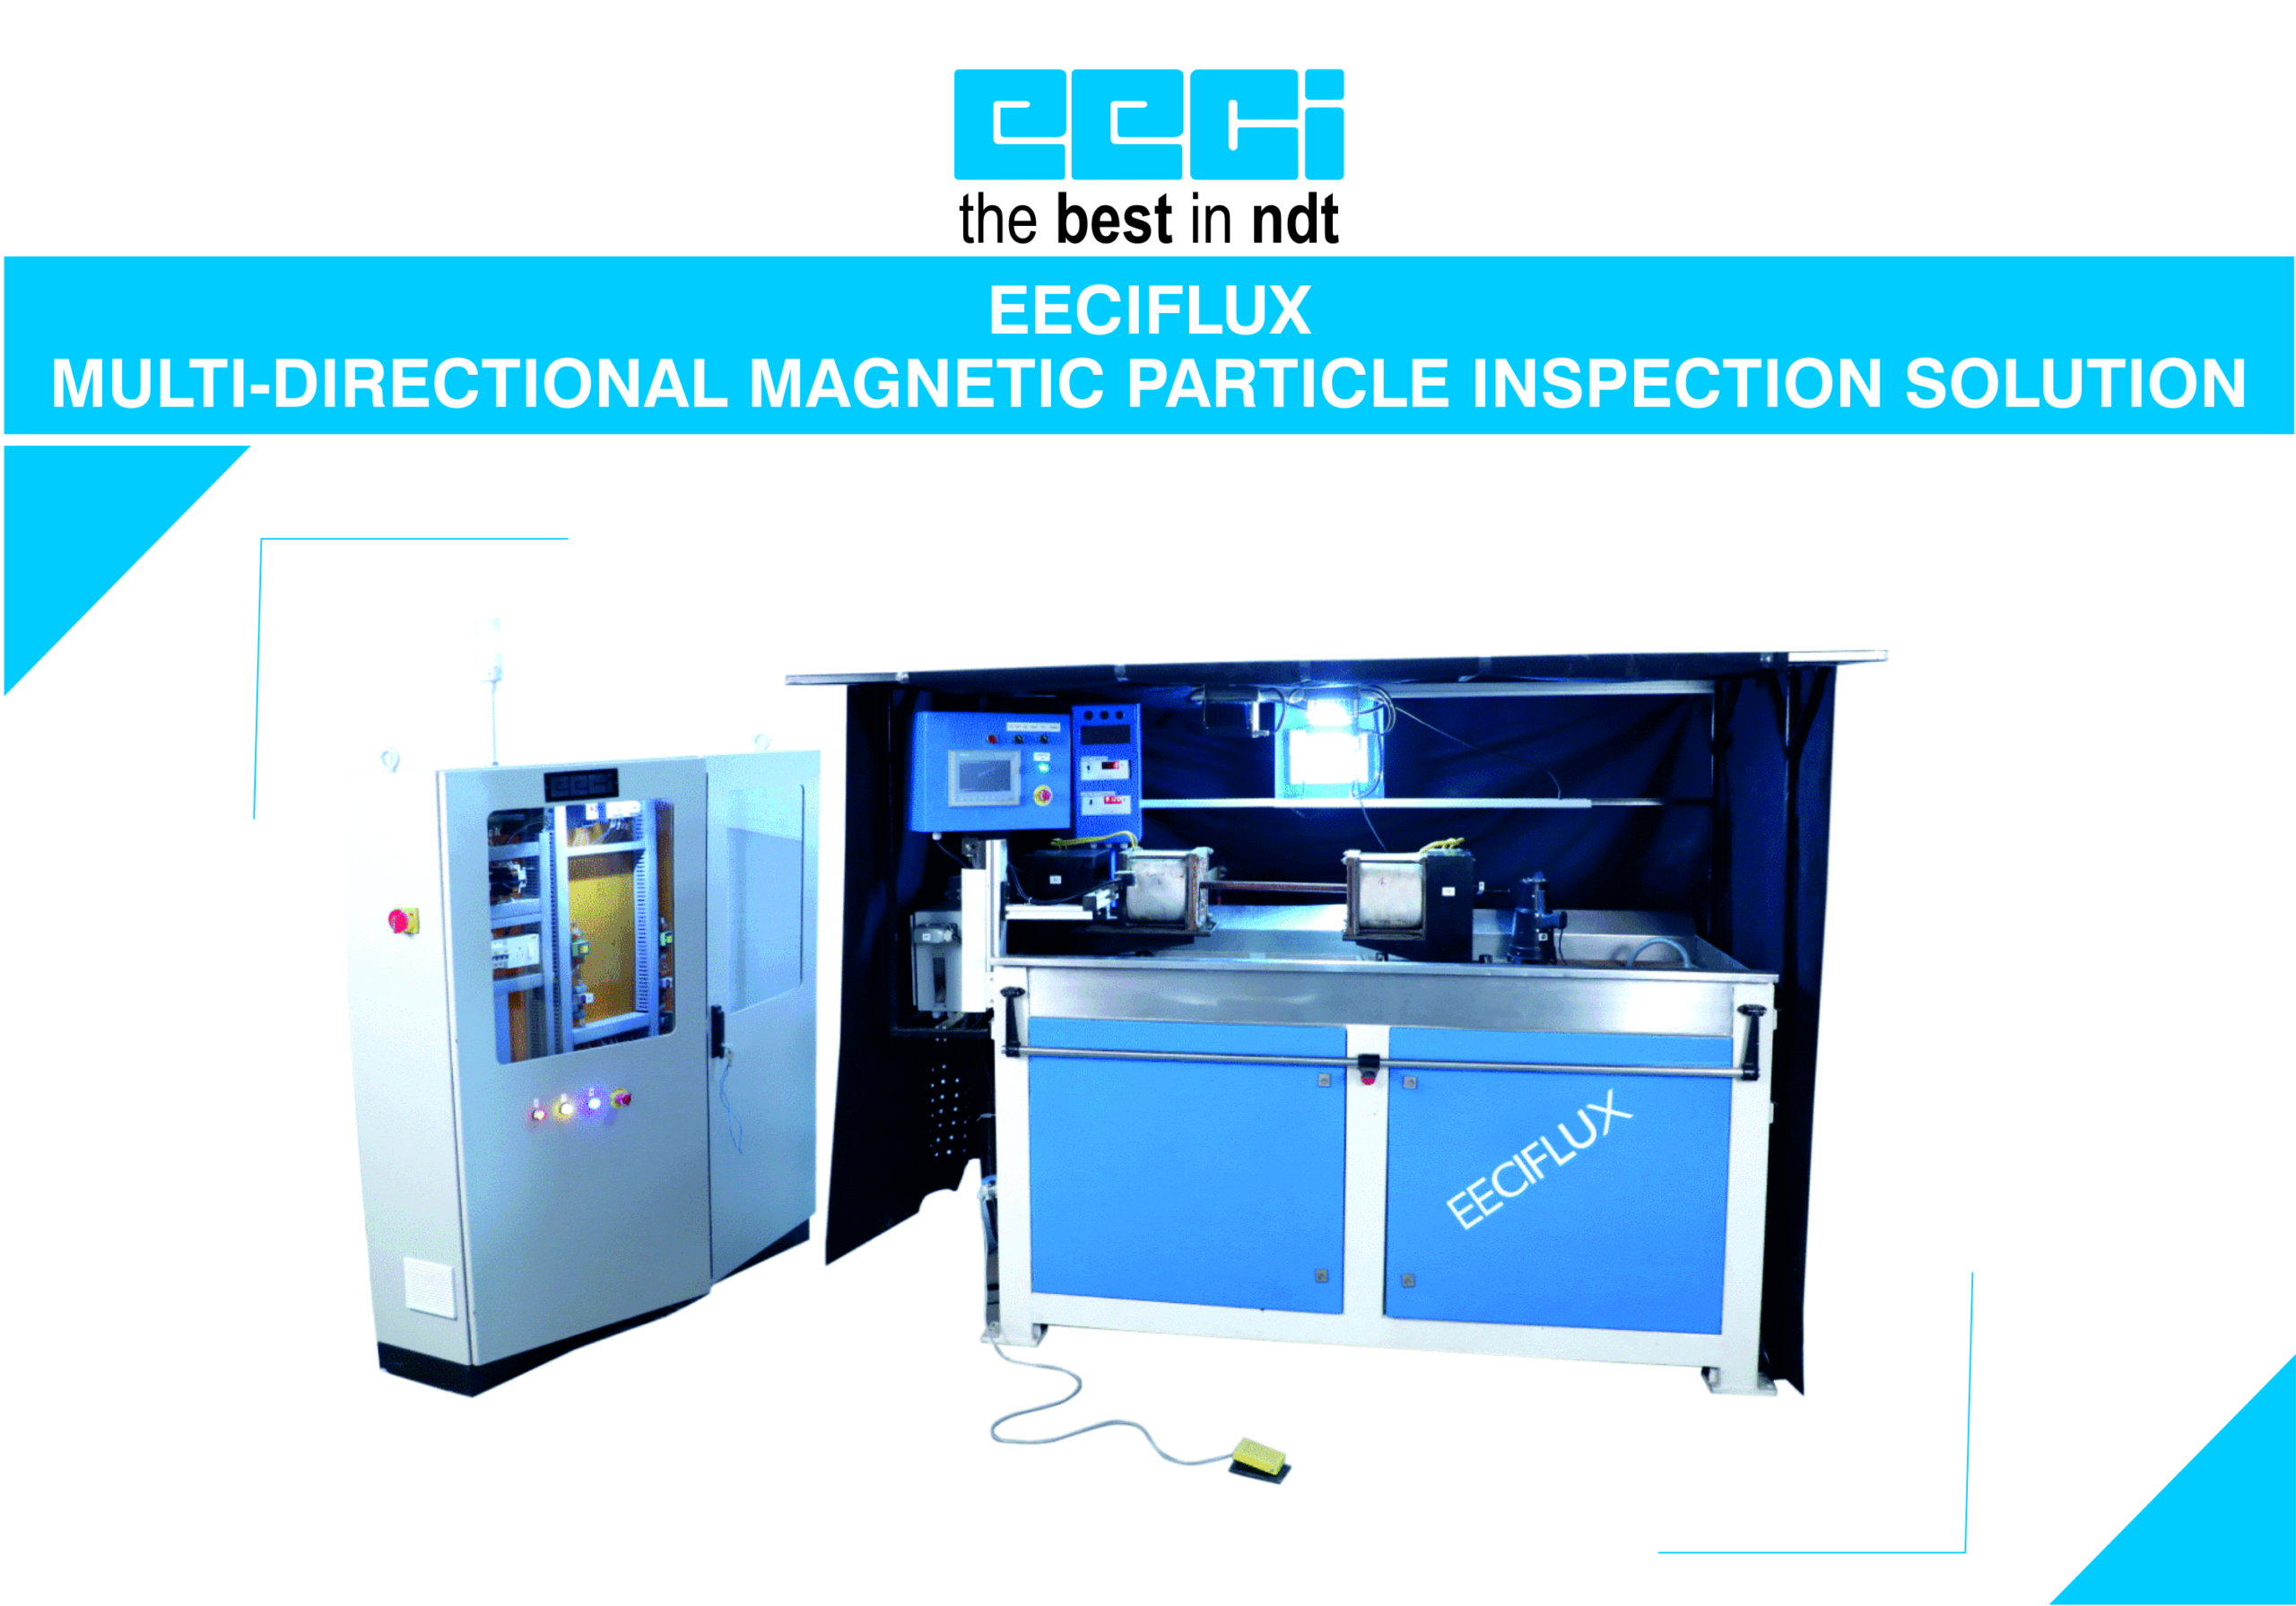 EECIFLUX MULTI-DIRECTIONAL MAGNETIC PARTICLE INSPECTION SOLUTION